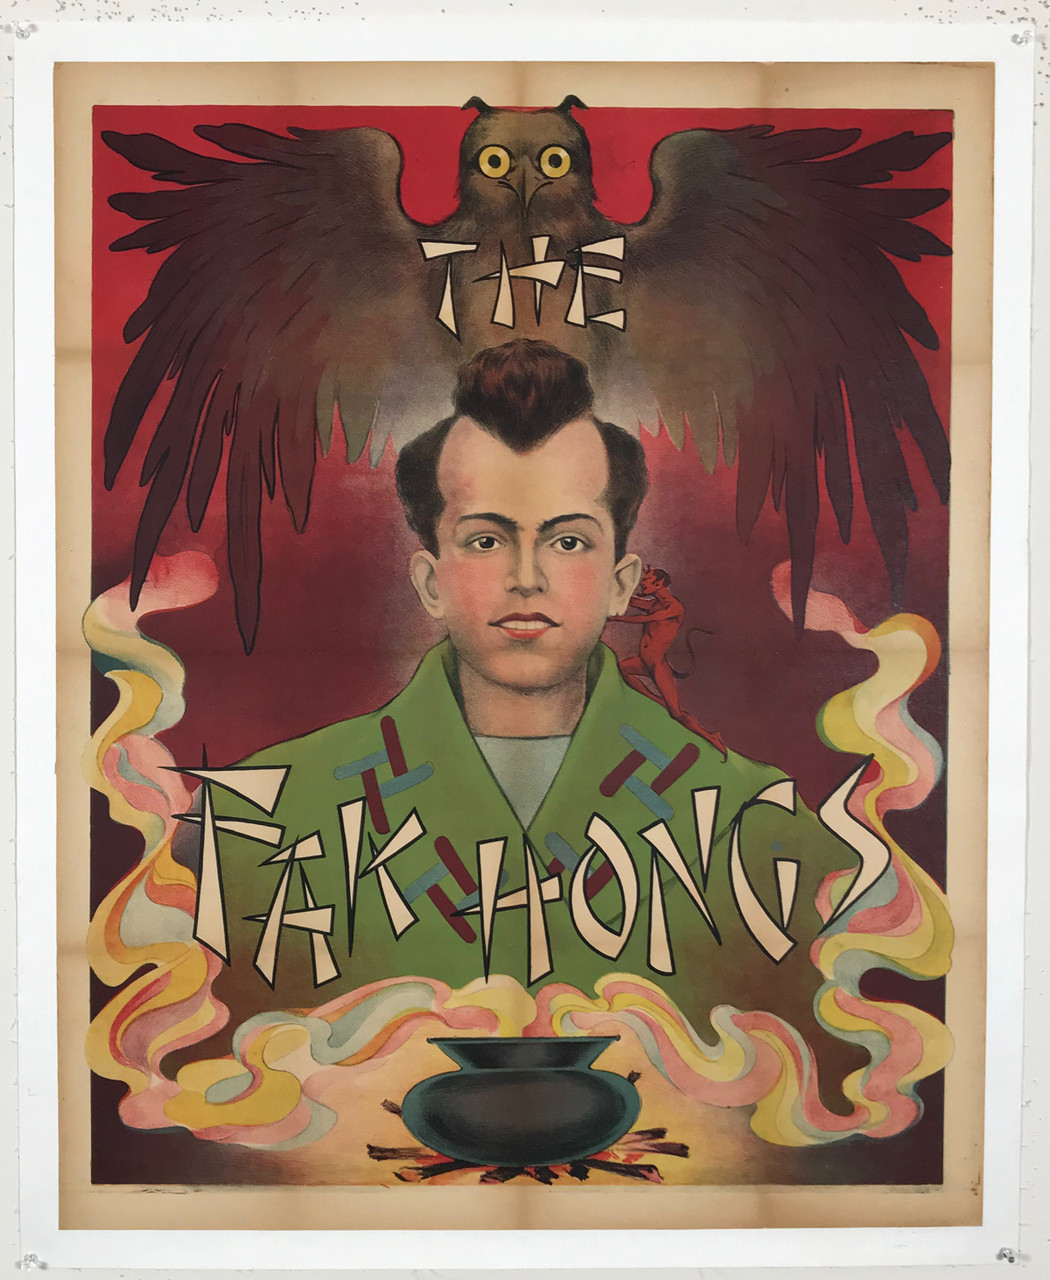 The Fak Hong (OWL) Original 1920 Vintage Spanish Magic Performer Stone Lithograph Poster Linen Backed.